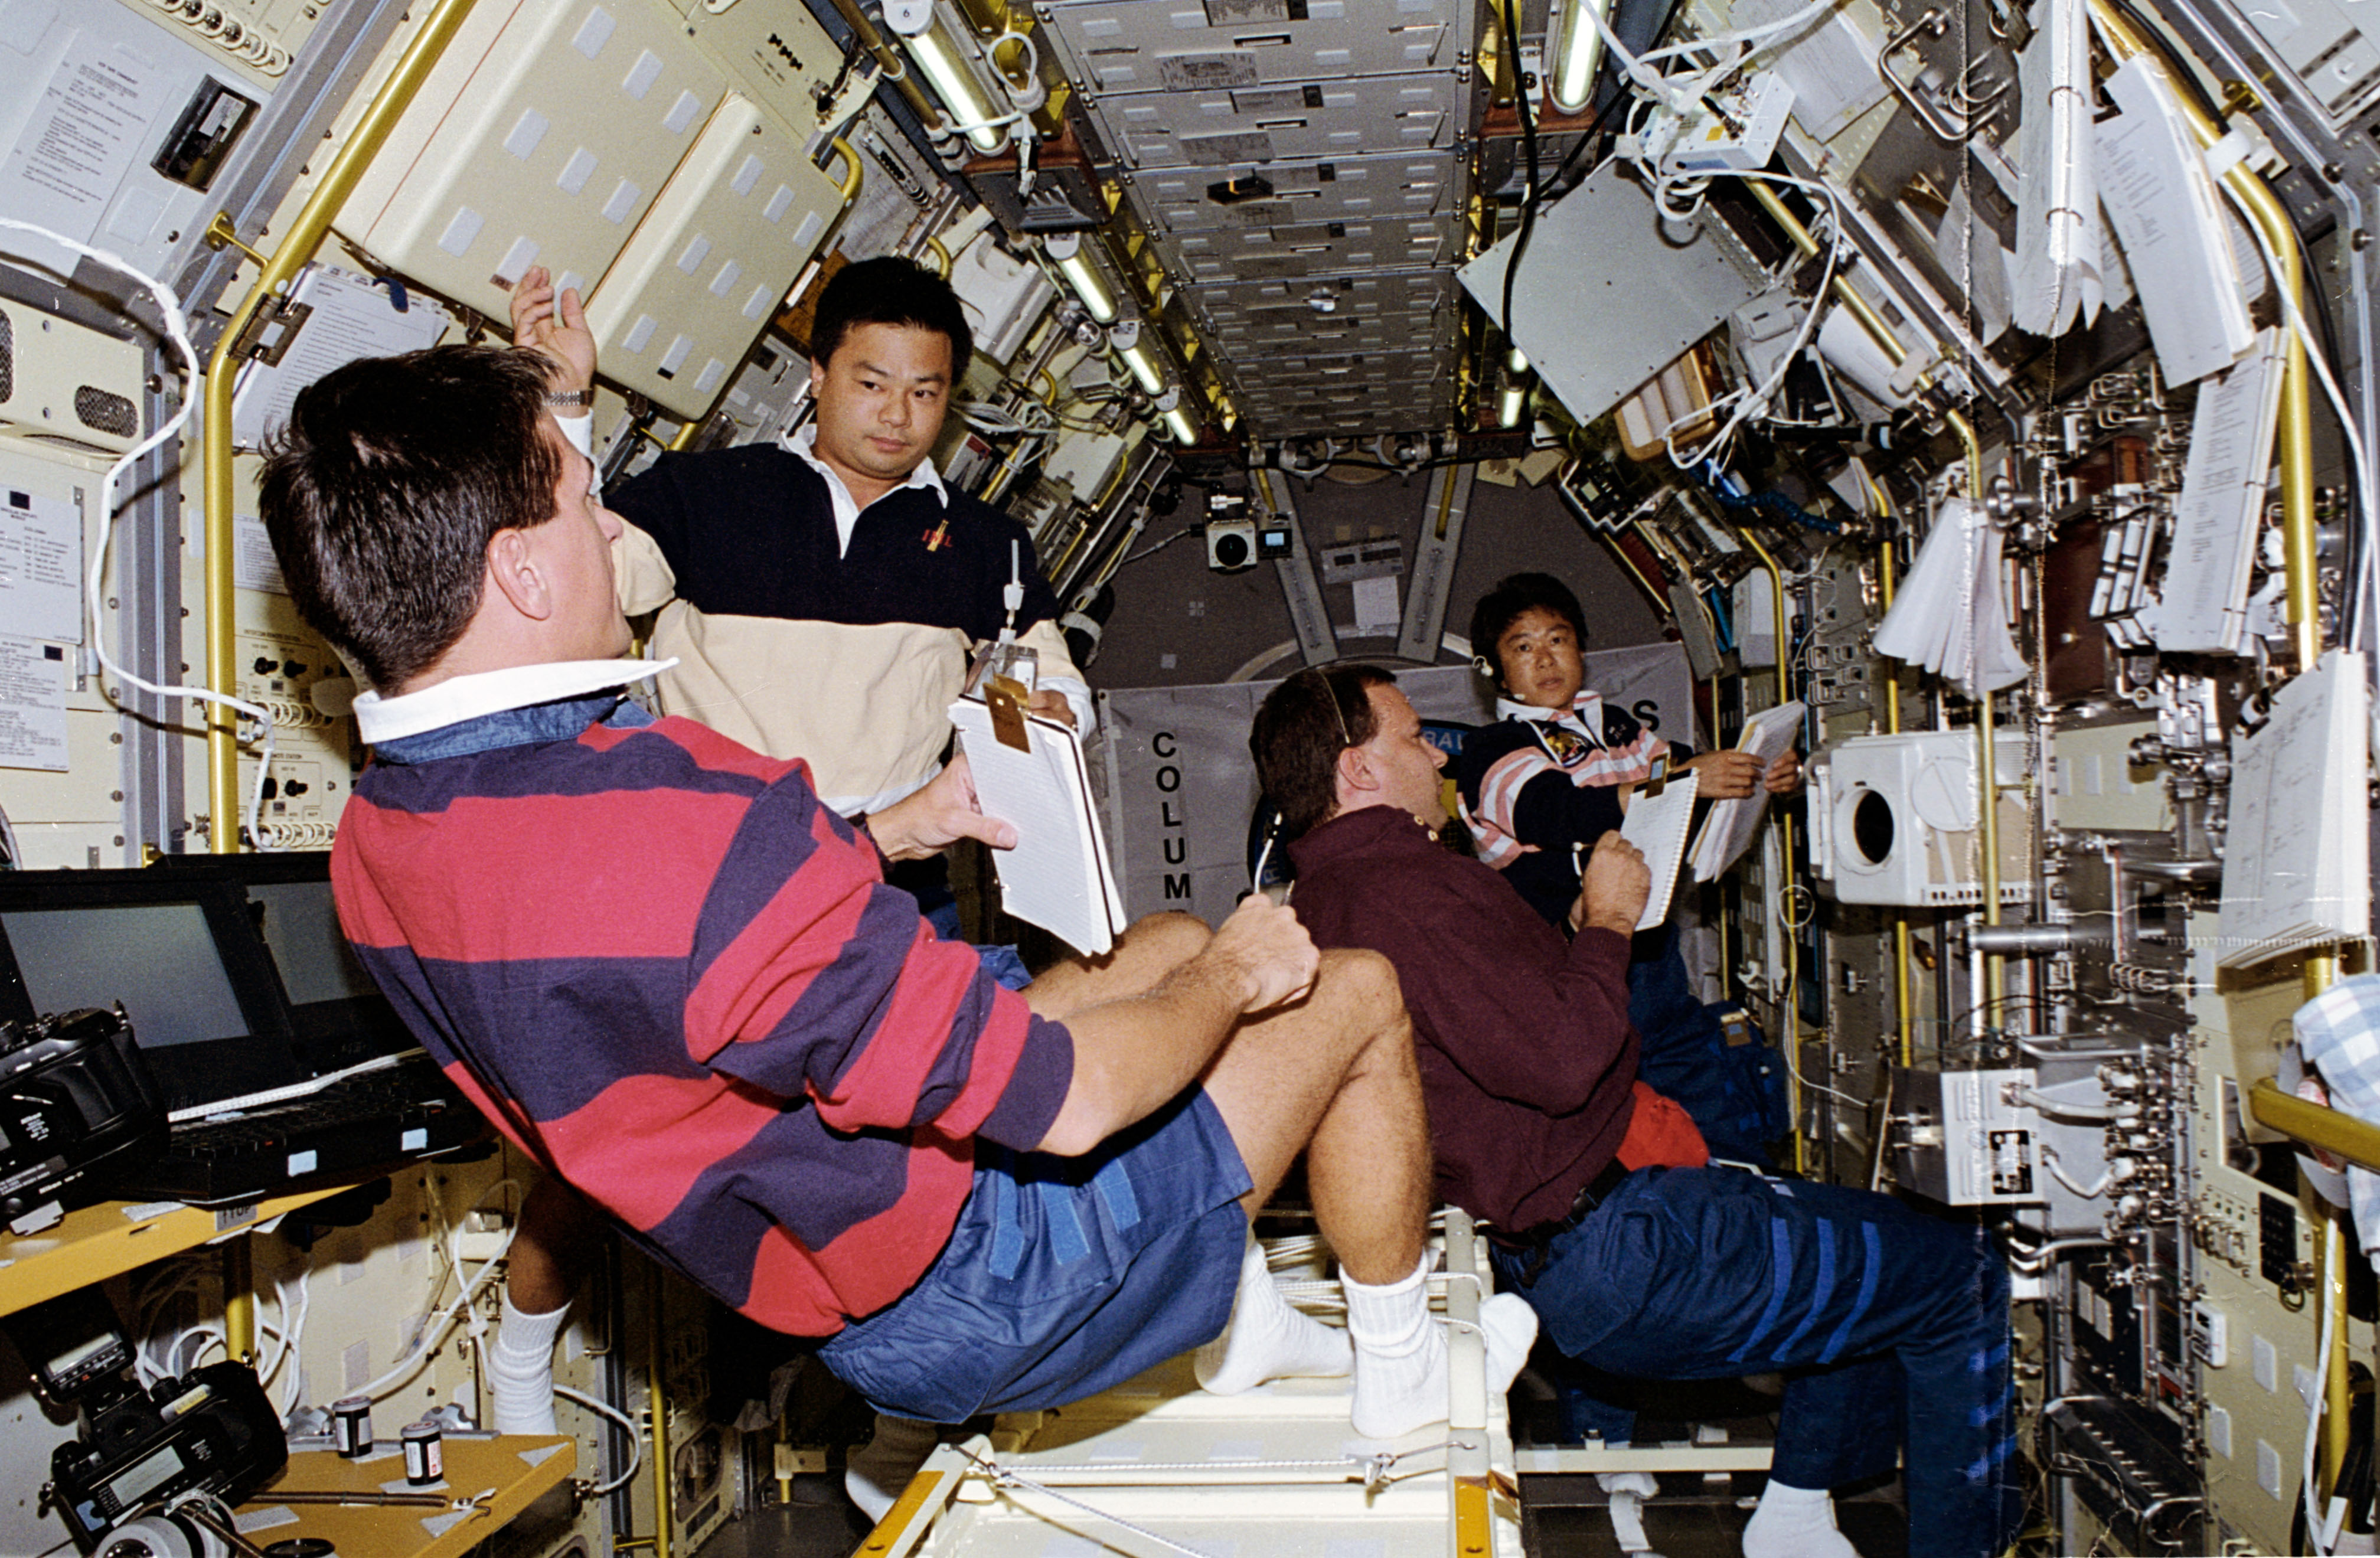 Donald A. Thomas, left, Leroy Chiao, Richard J. Hieb, and Chiaki Mukai at work in the Spacelab module